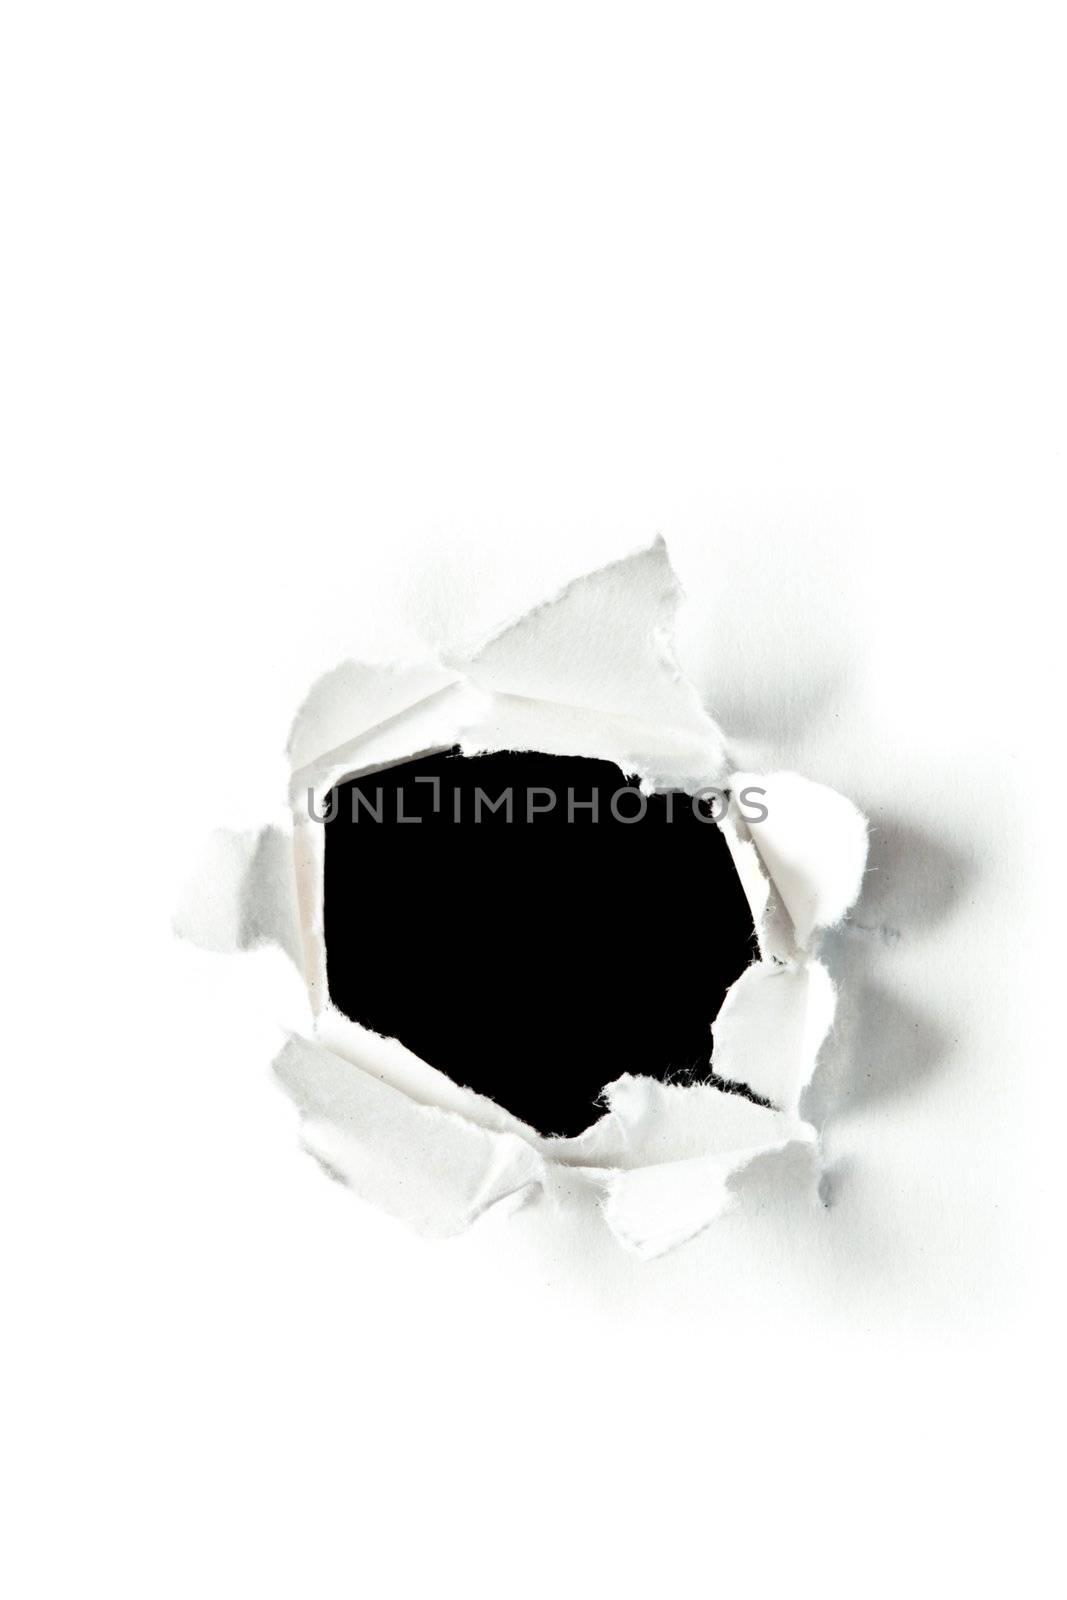 Circle hole in paper by Wavebreakmedia